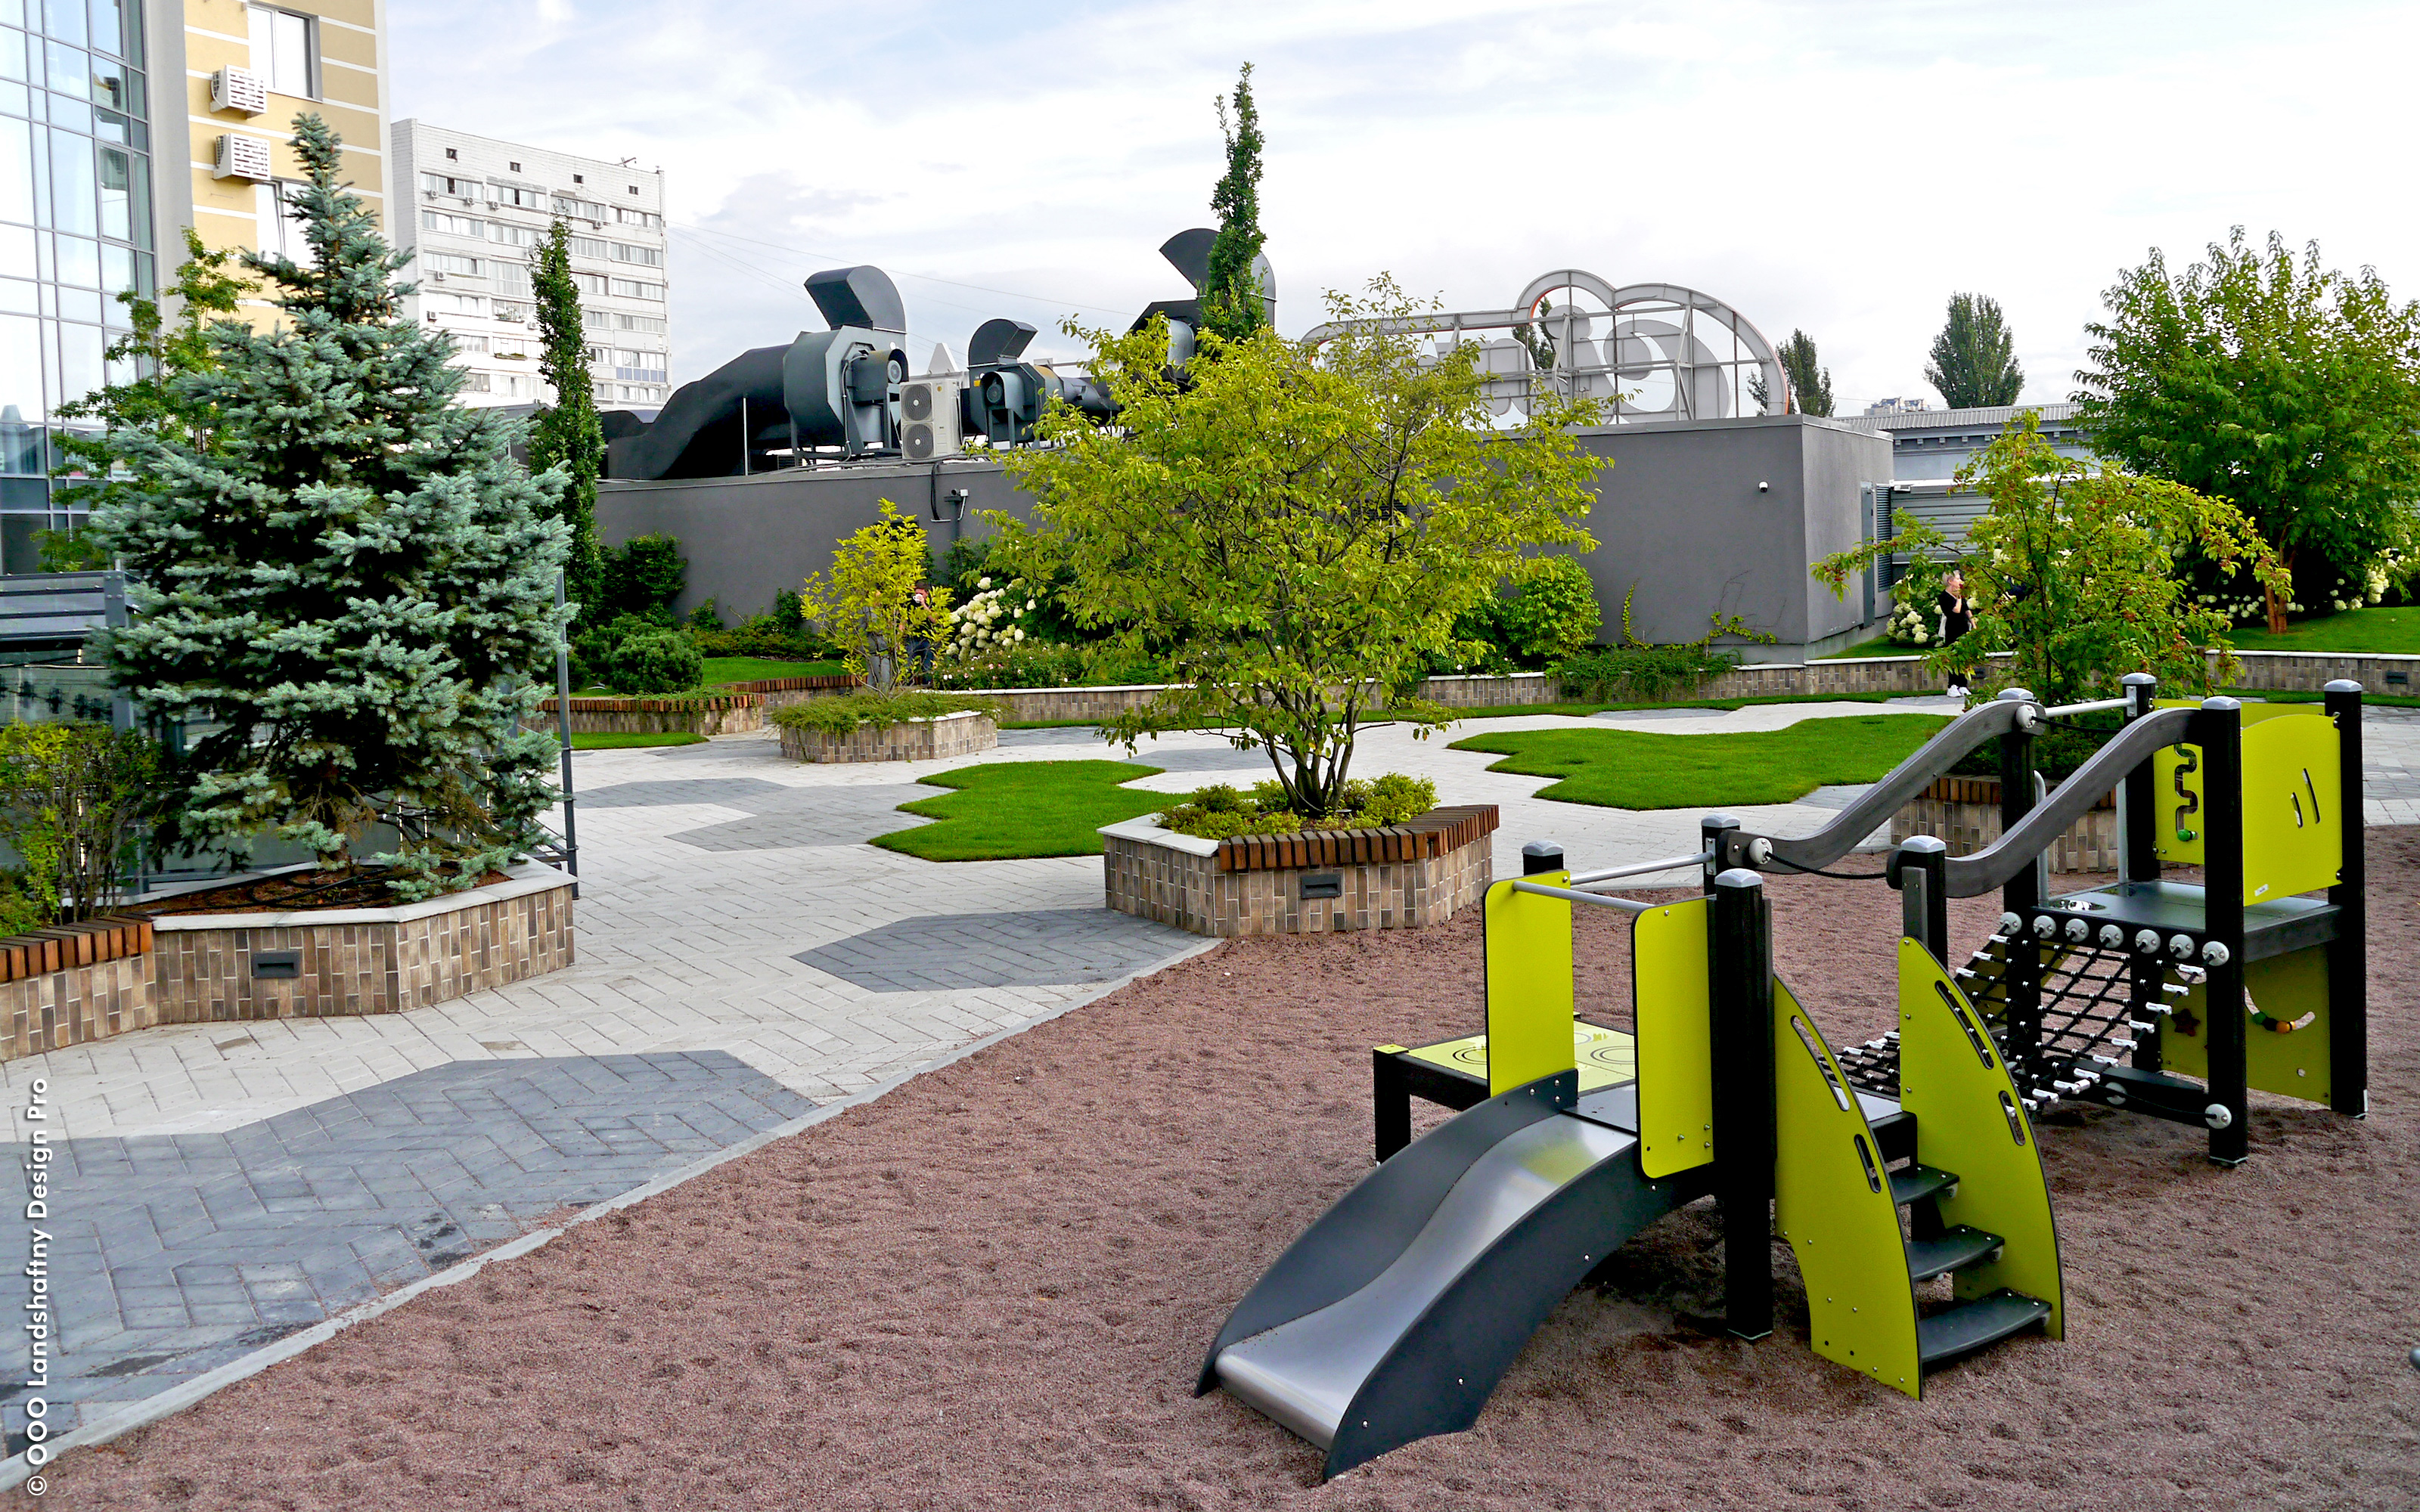 Roof garden with a playground